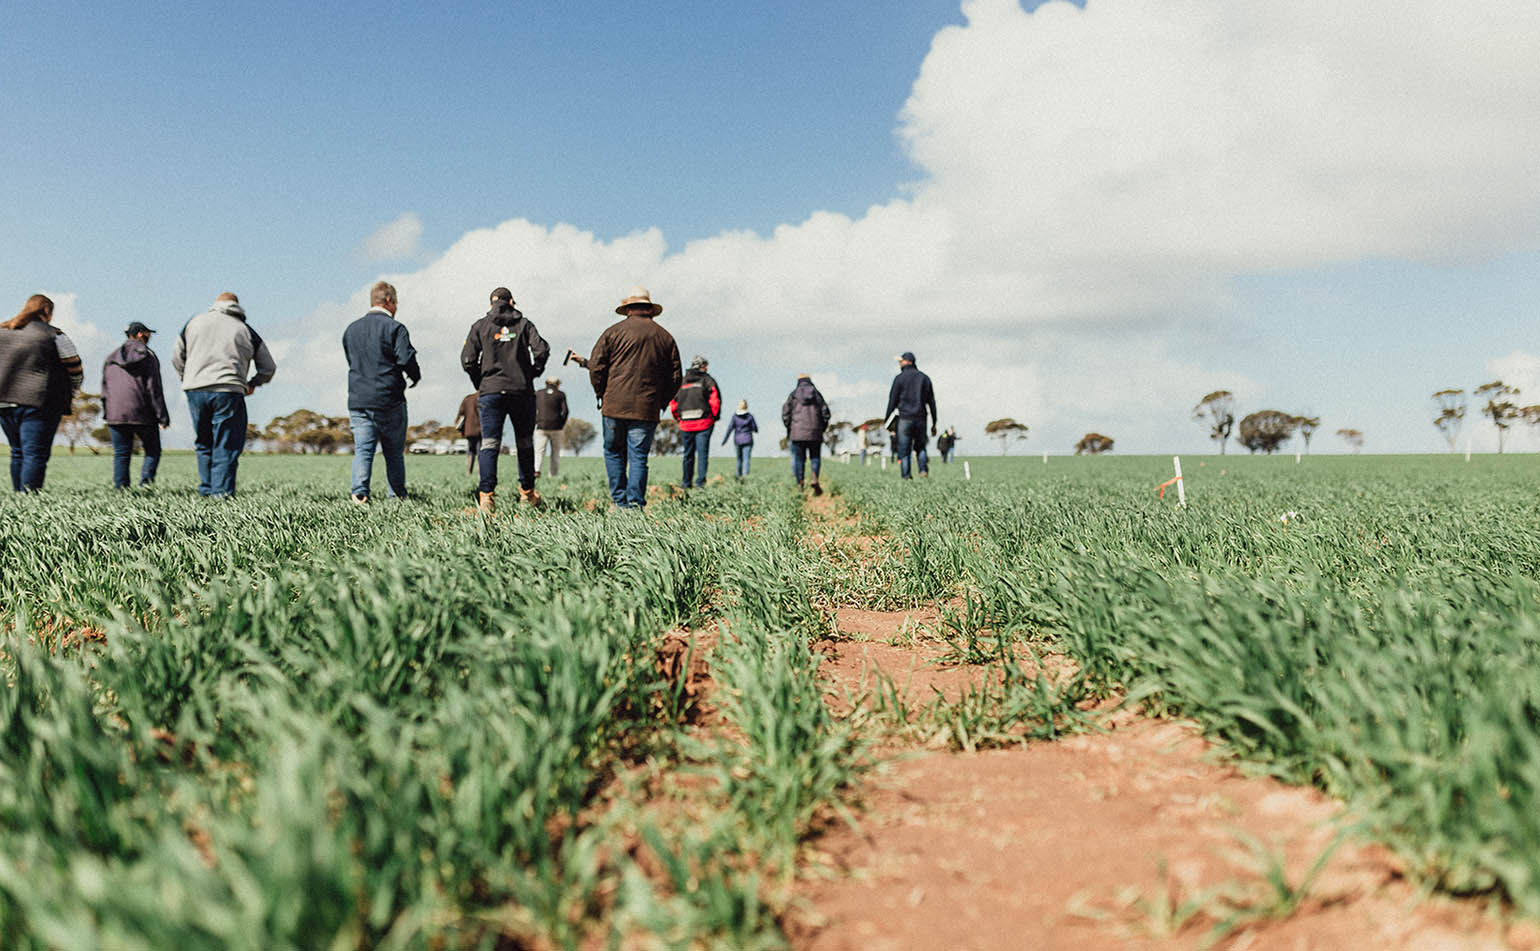 Farmers and researchers walking through a field.